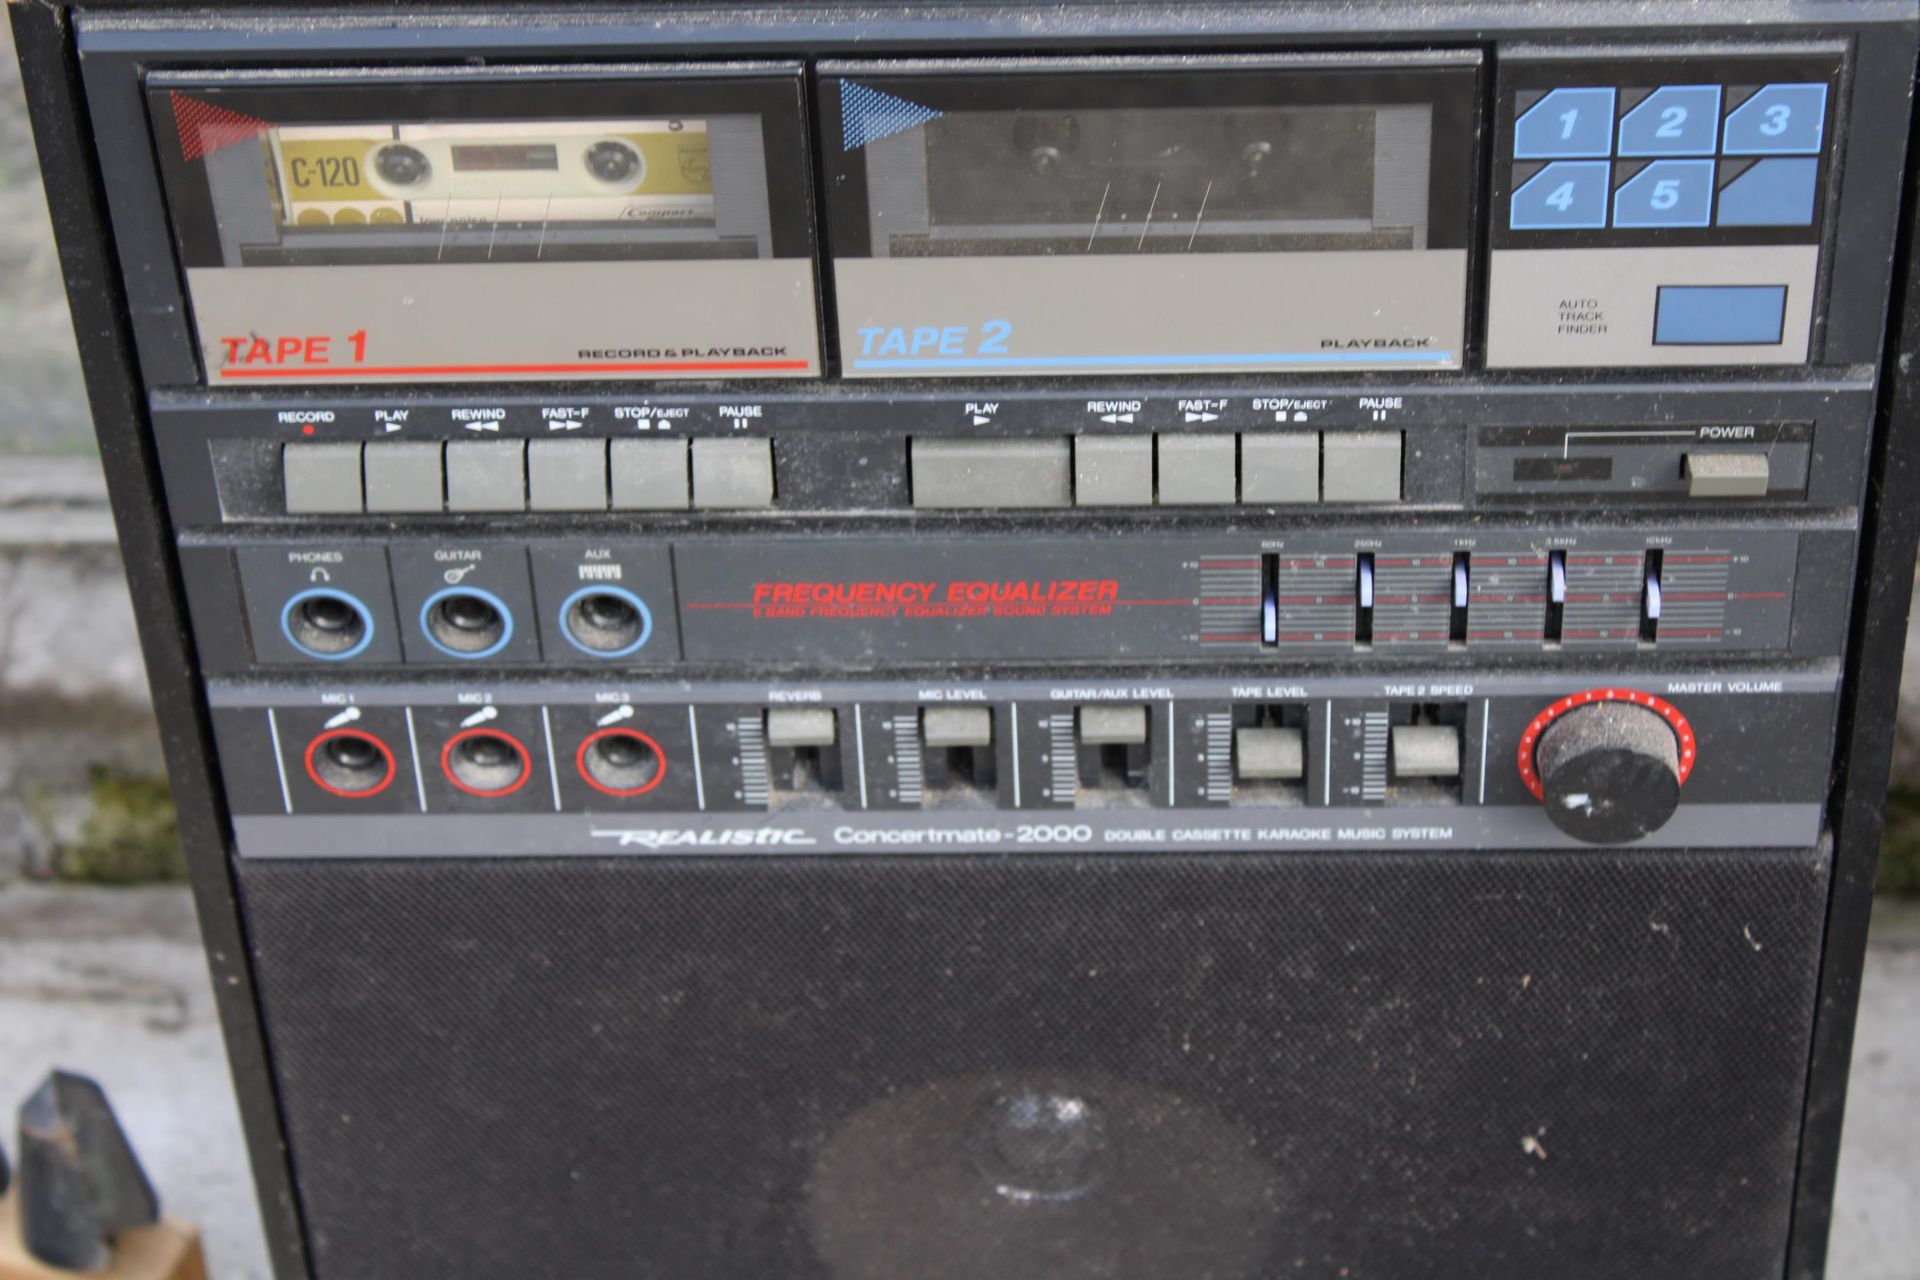 A REALISTIC CONCERTMATE 2000 DOUBLE CASSETTE KARAOKE MUSIC SYSTEM - Image 2 of 2